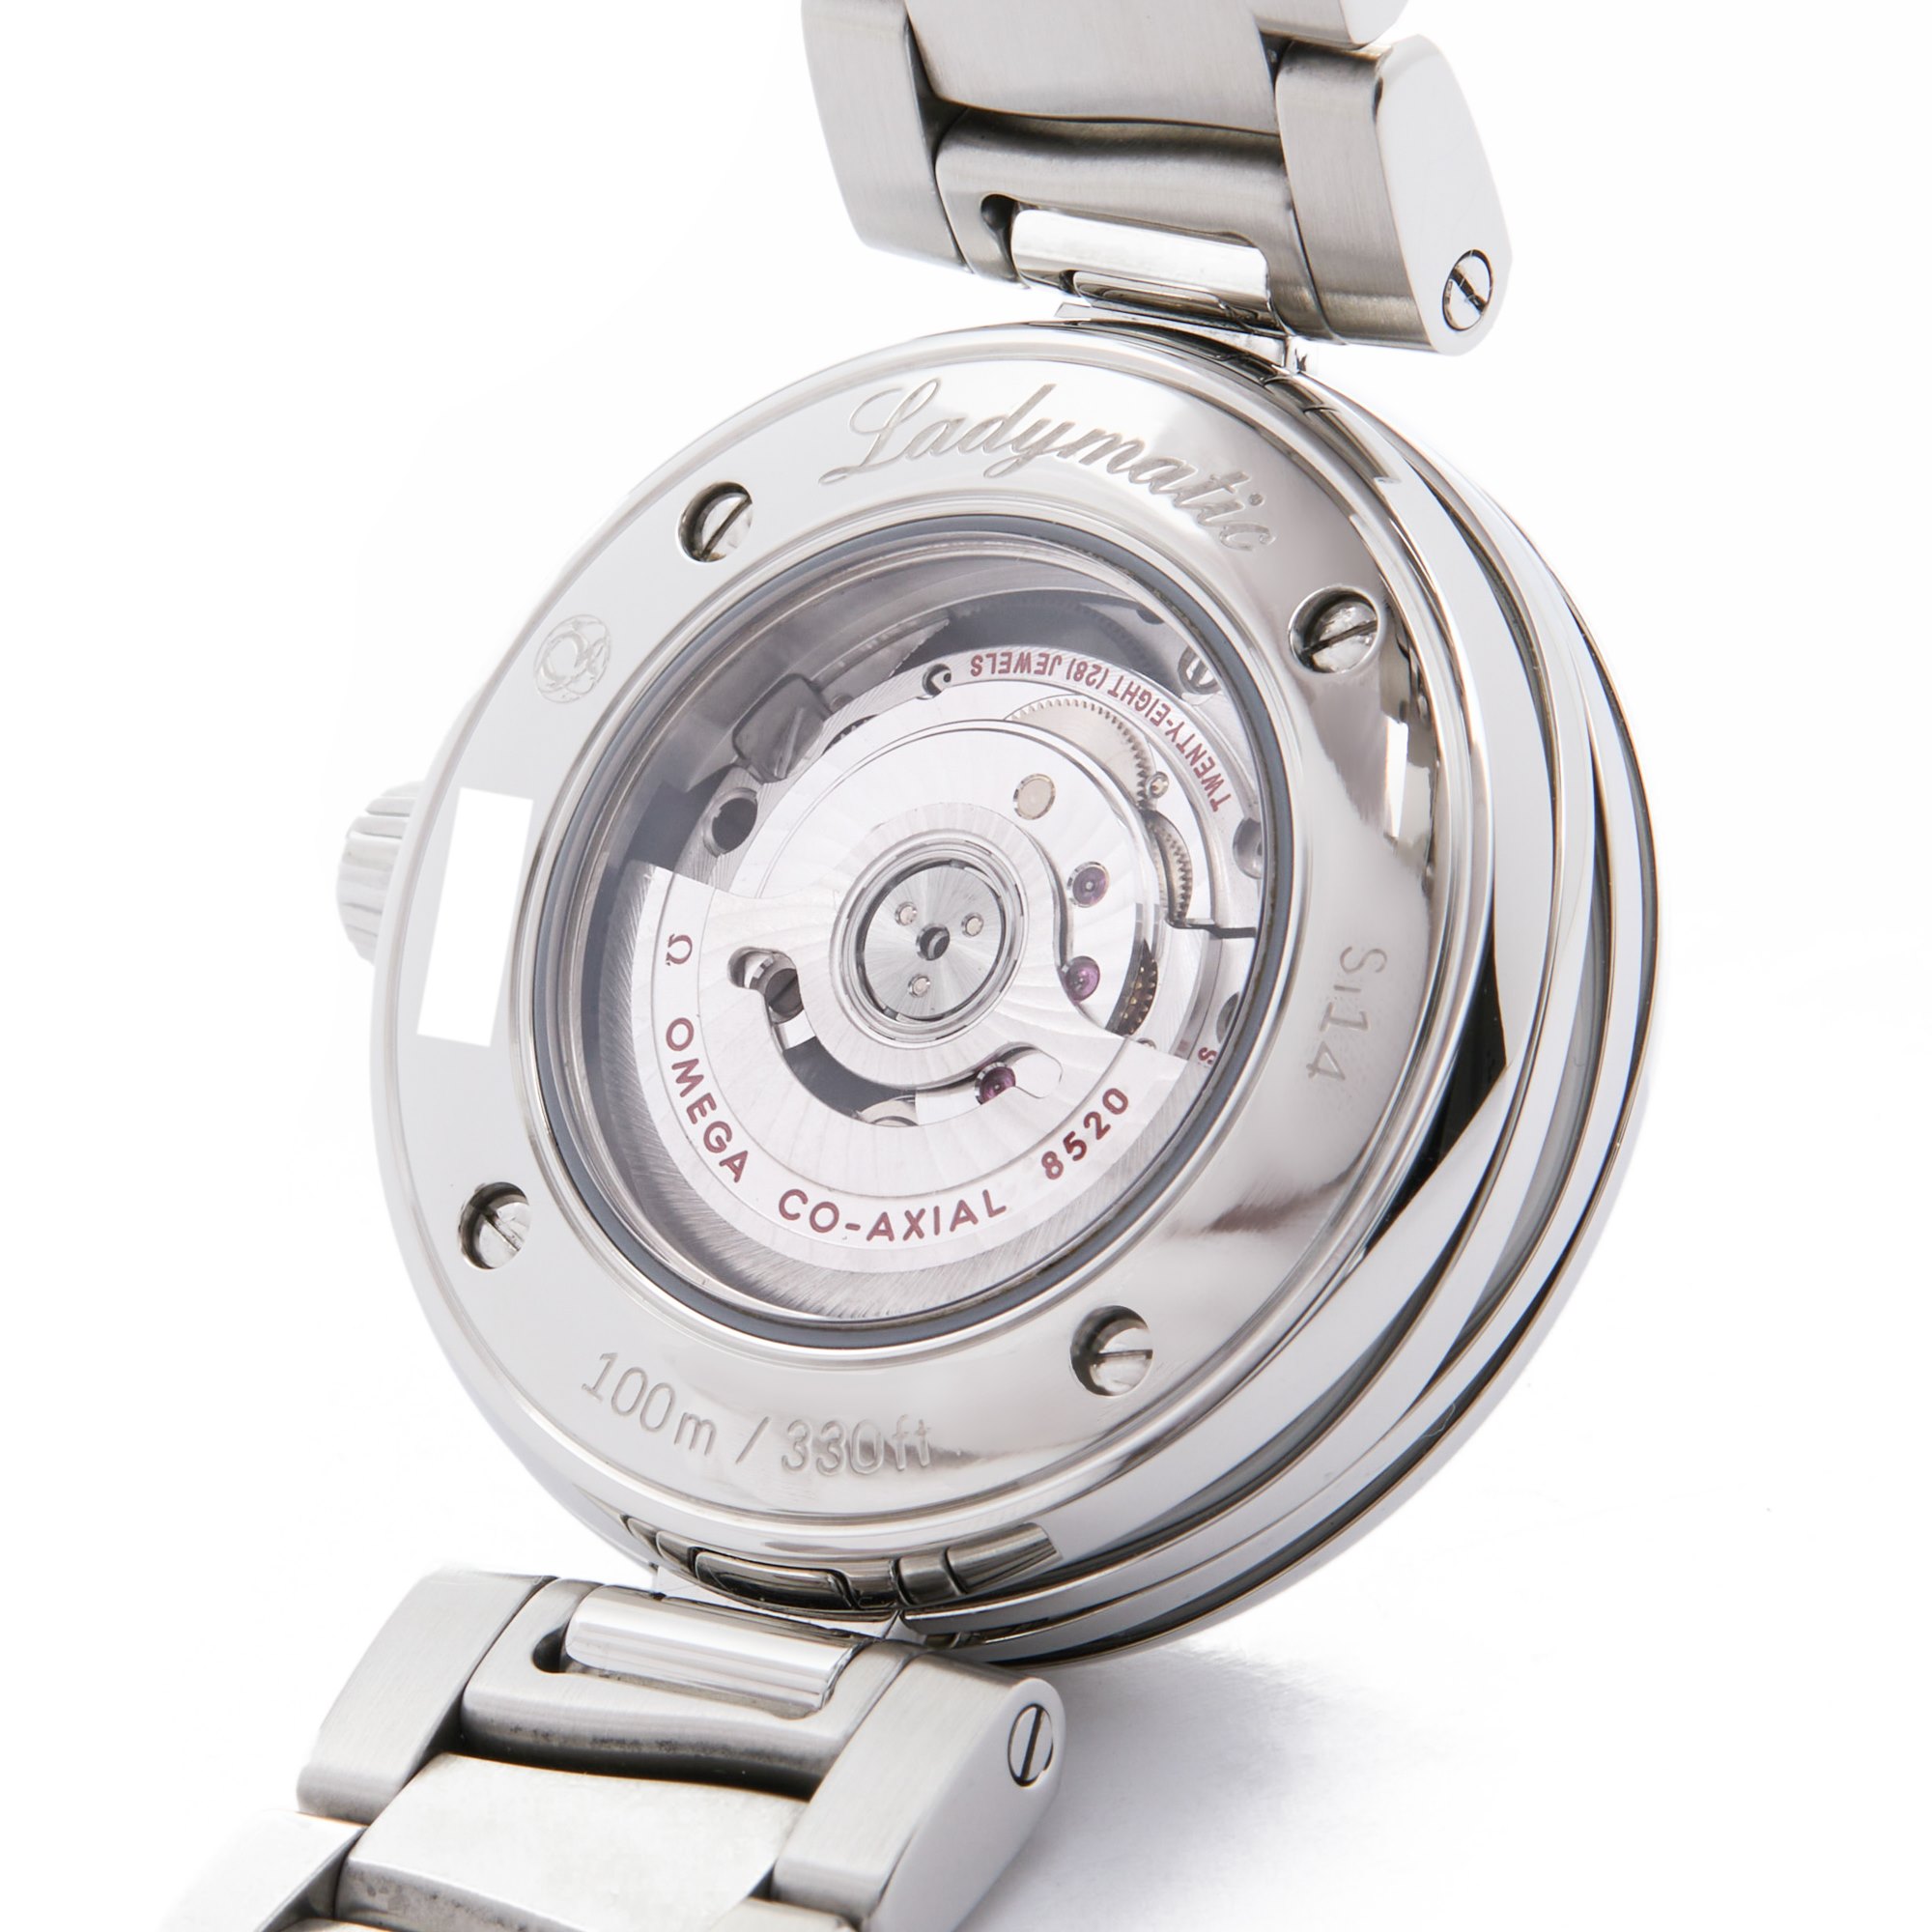 Omega De Ville Ladymatic Stainless Steel 425.30.34.20.55.002